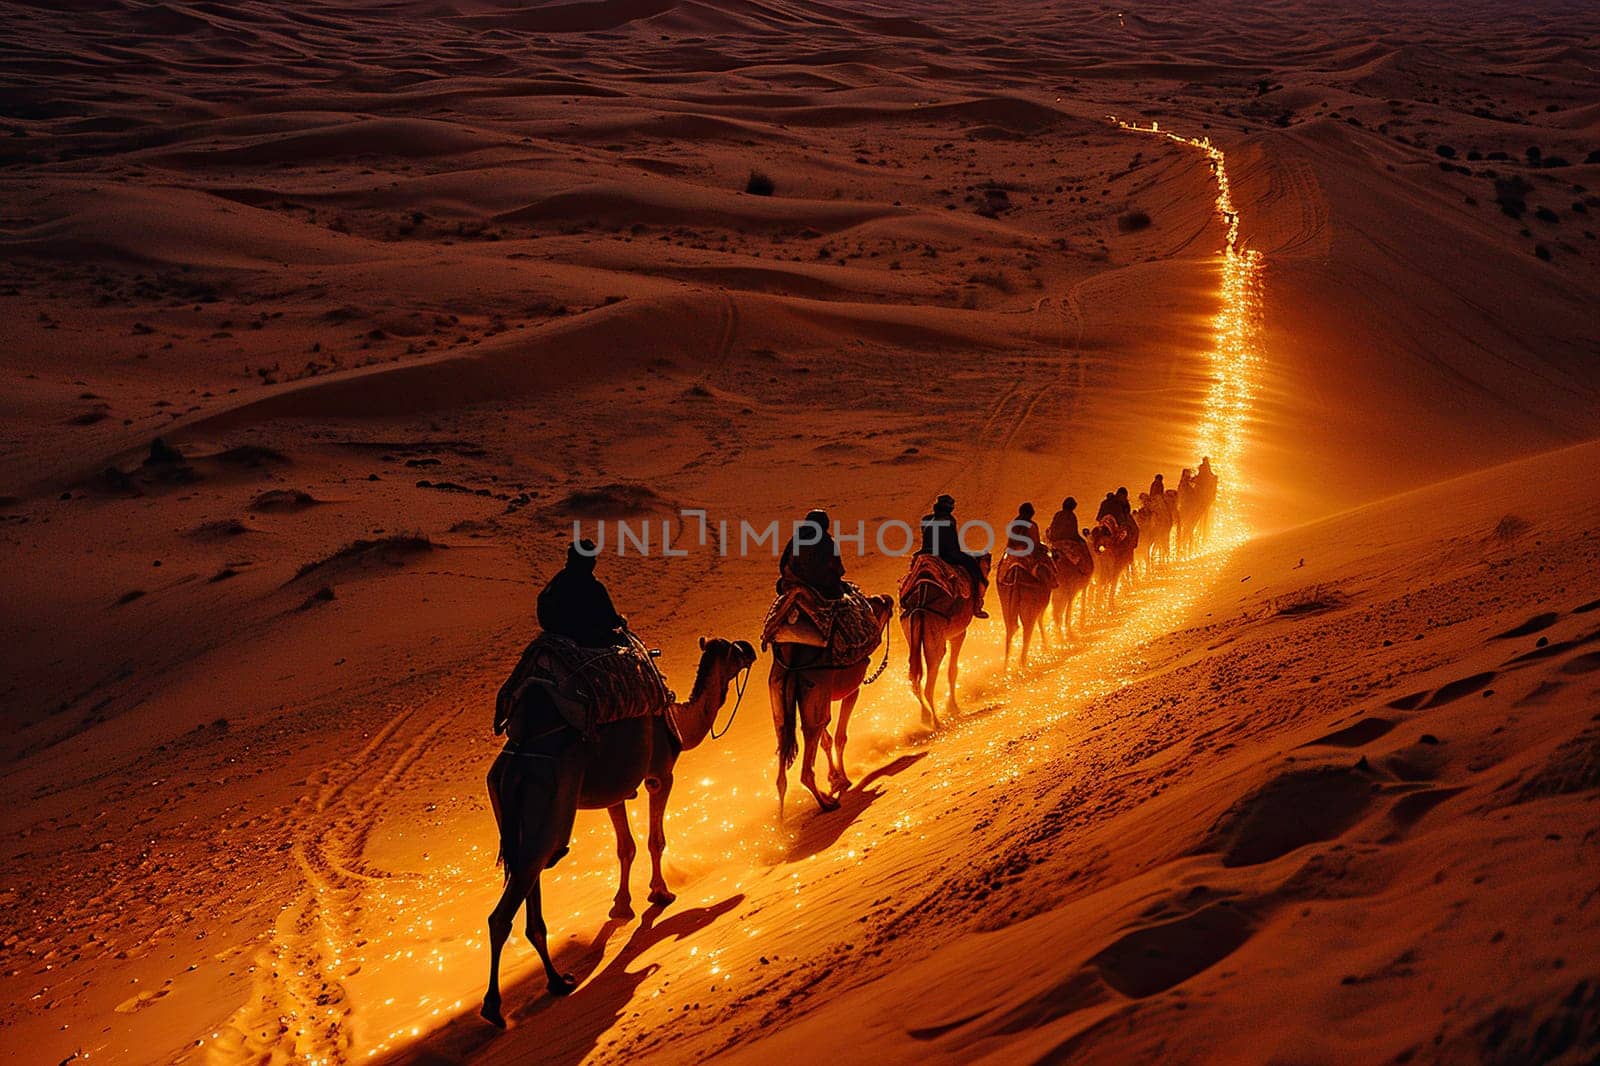 Top view of a camel caravan in the desert at night.